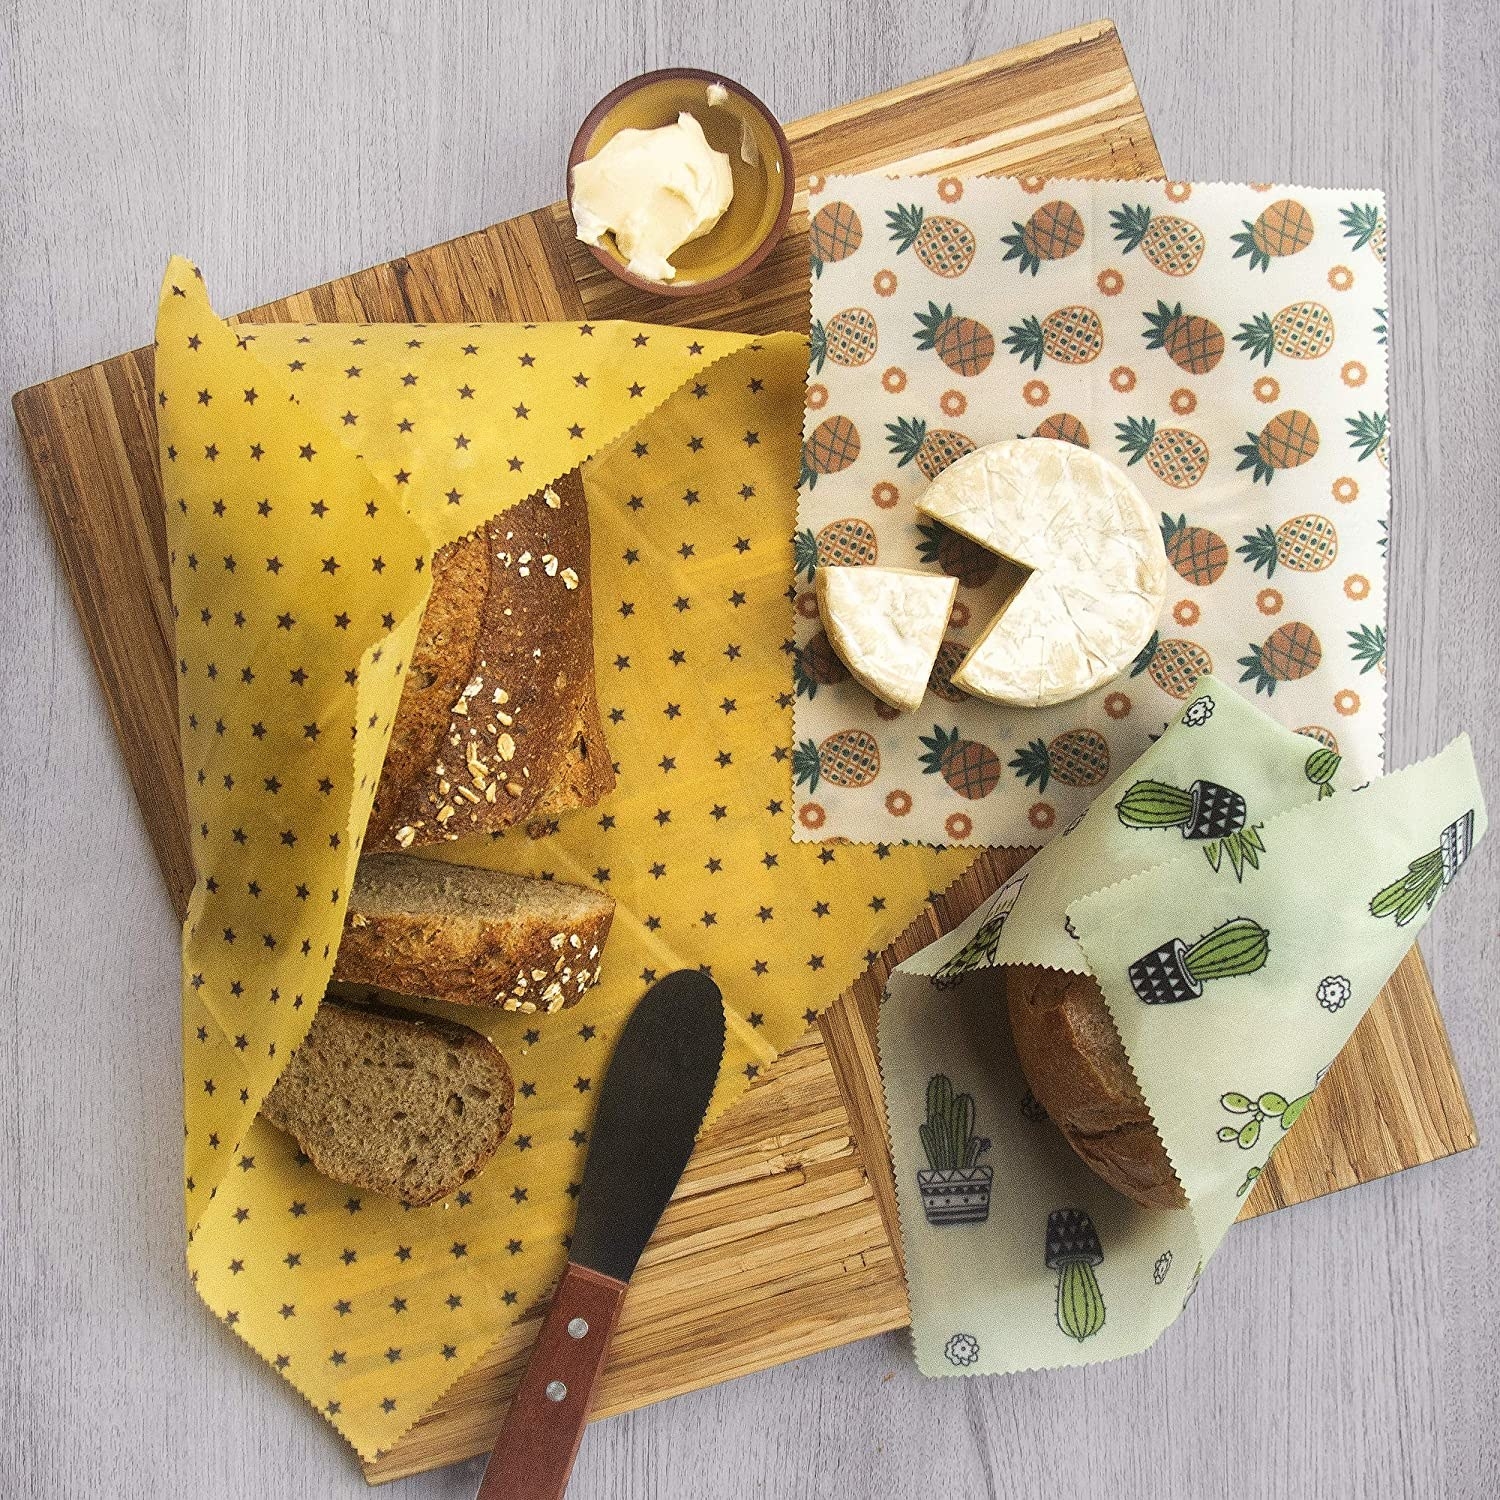 A trio of beeswax wraps covering breads and cheese